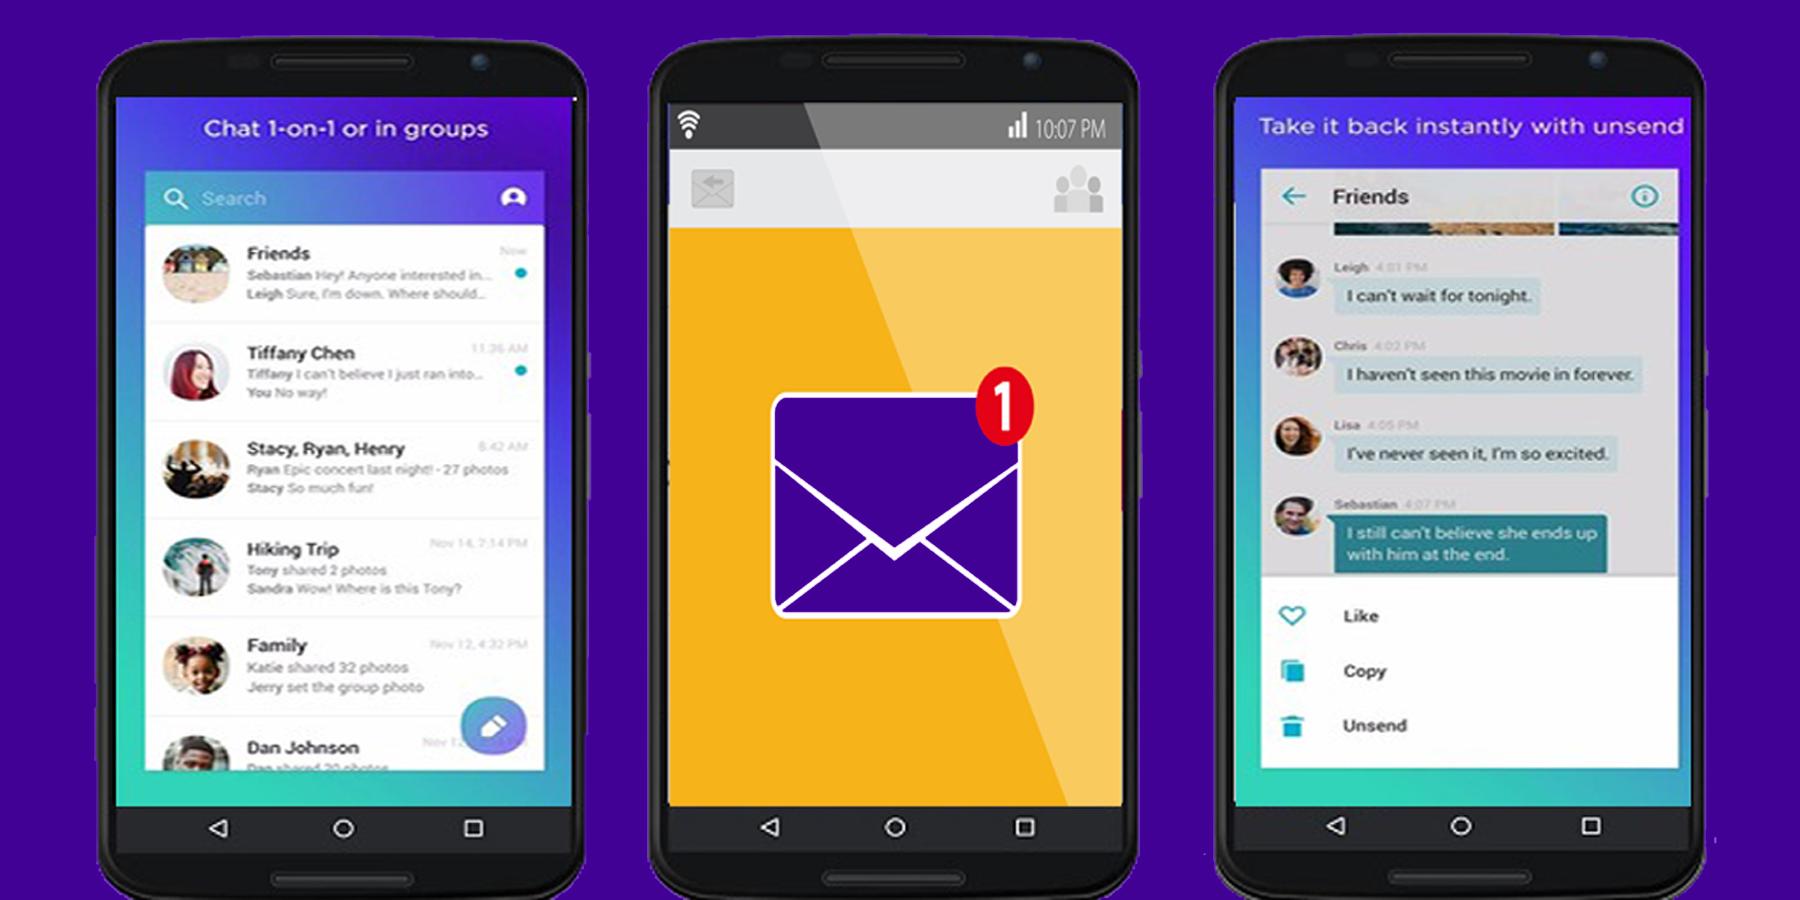 How To Use The Yahoo App On Android